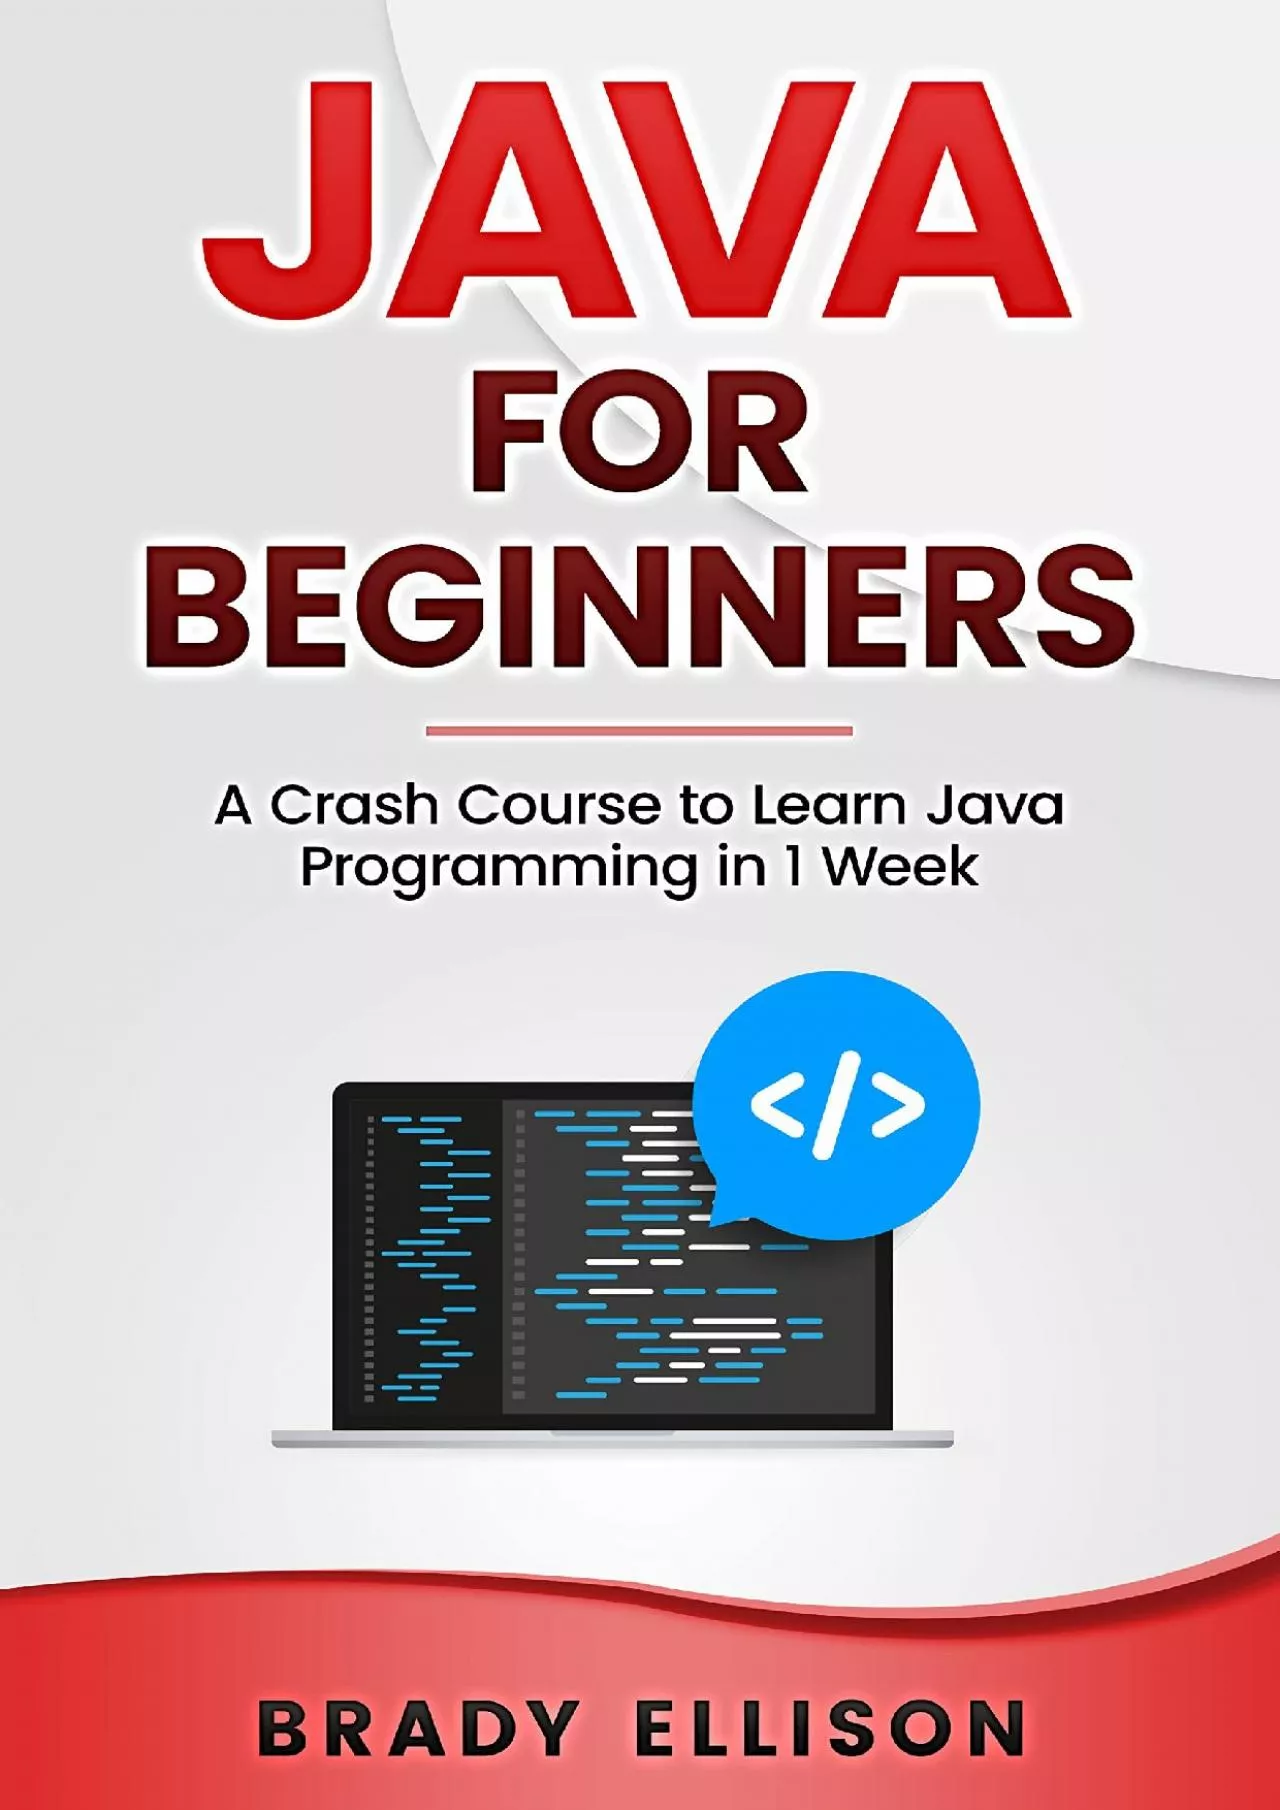 [eBOOK]-Java for Beginners: A Crash Course to Learn Java Programming in 1 Week (Programming